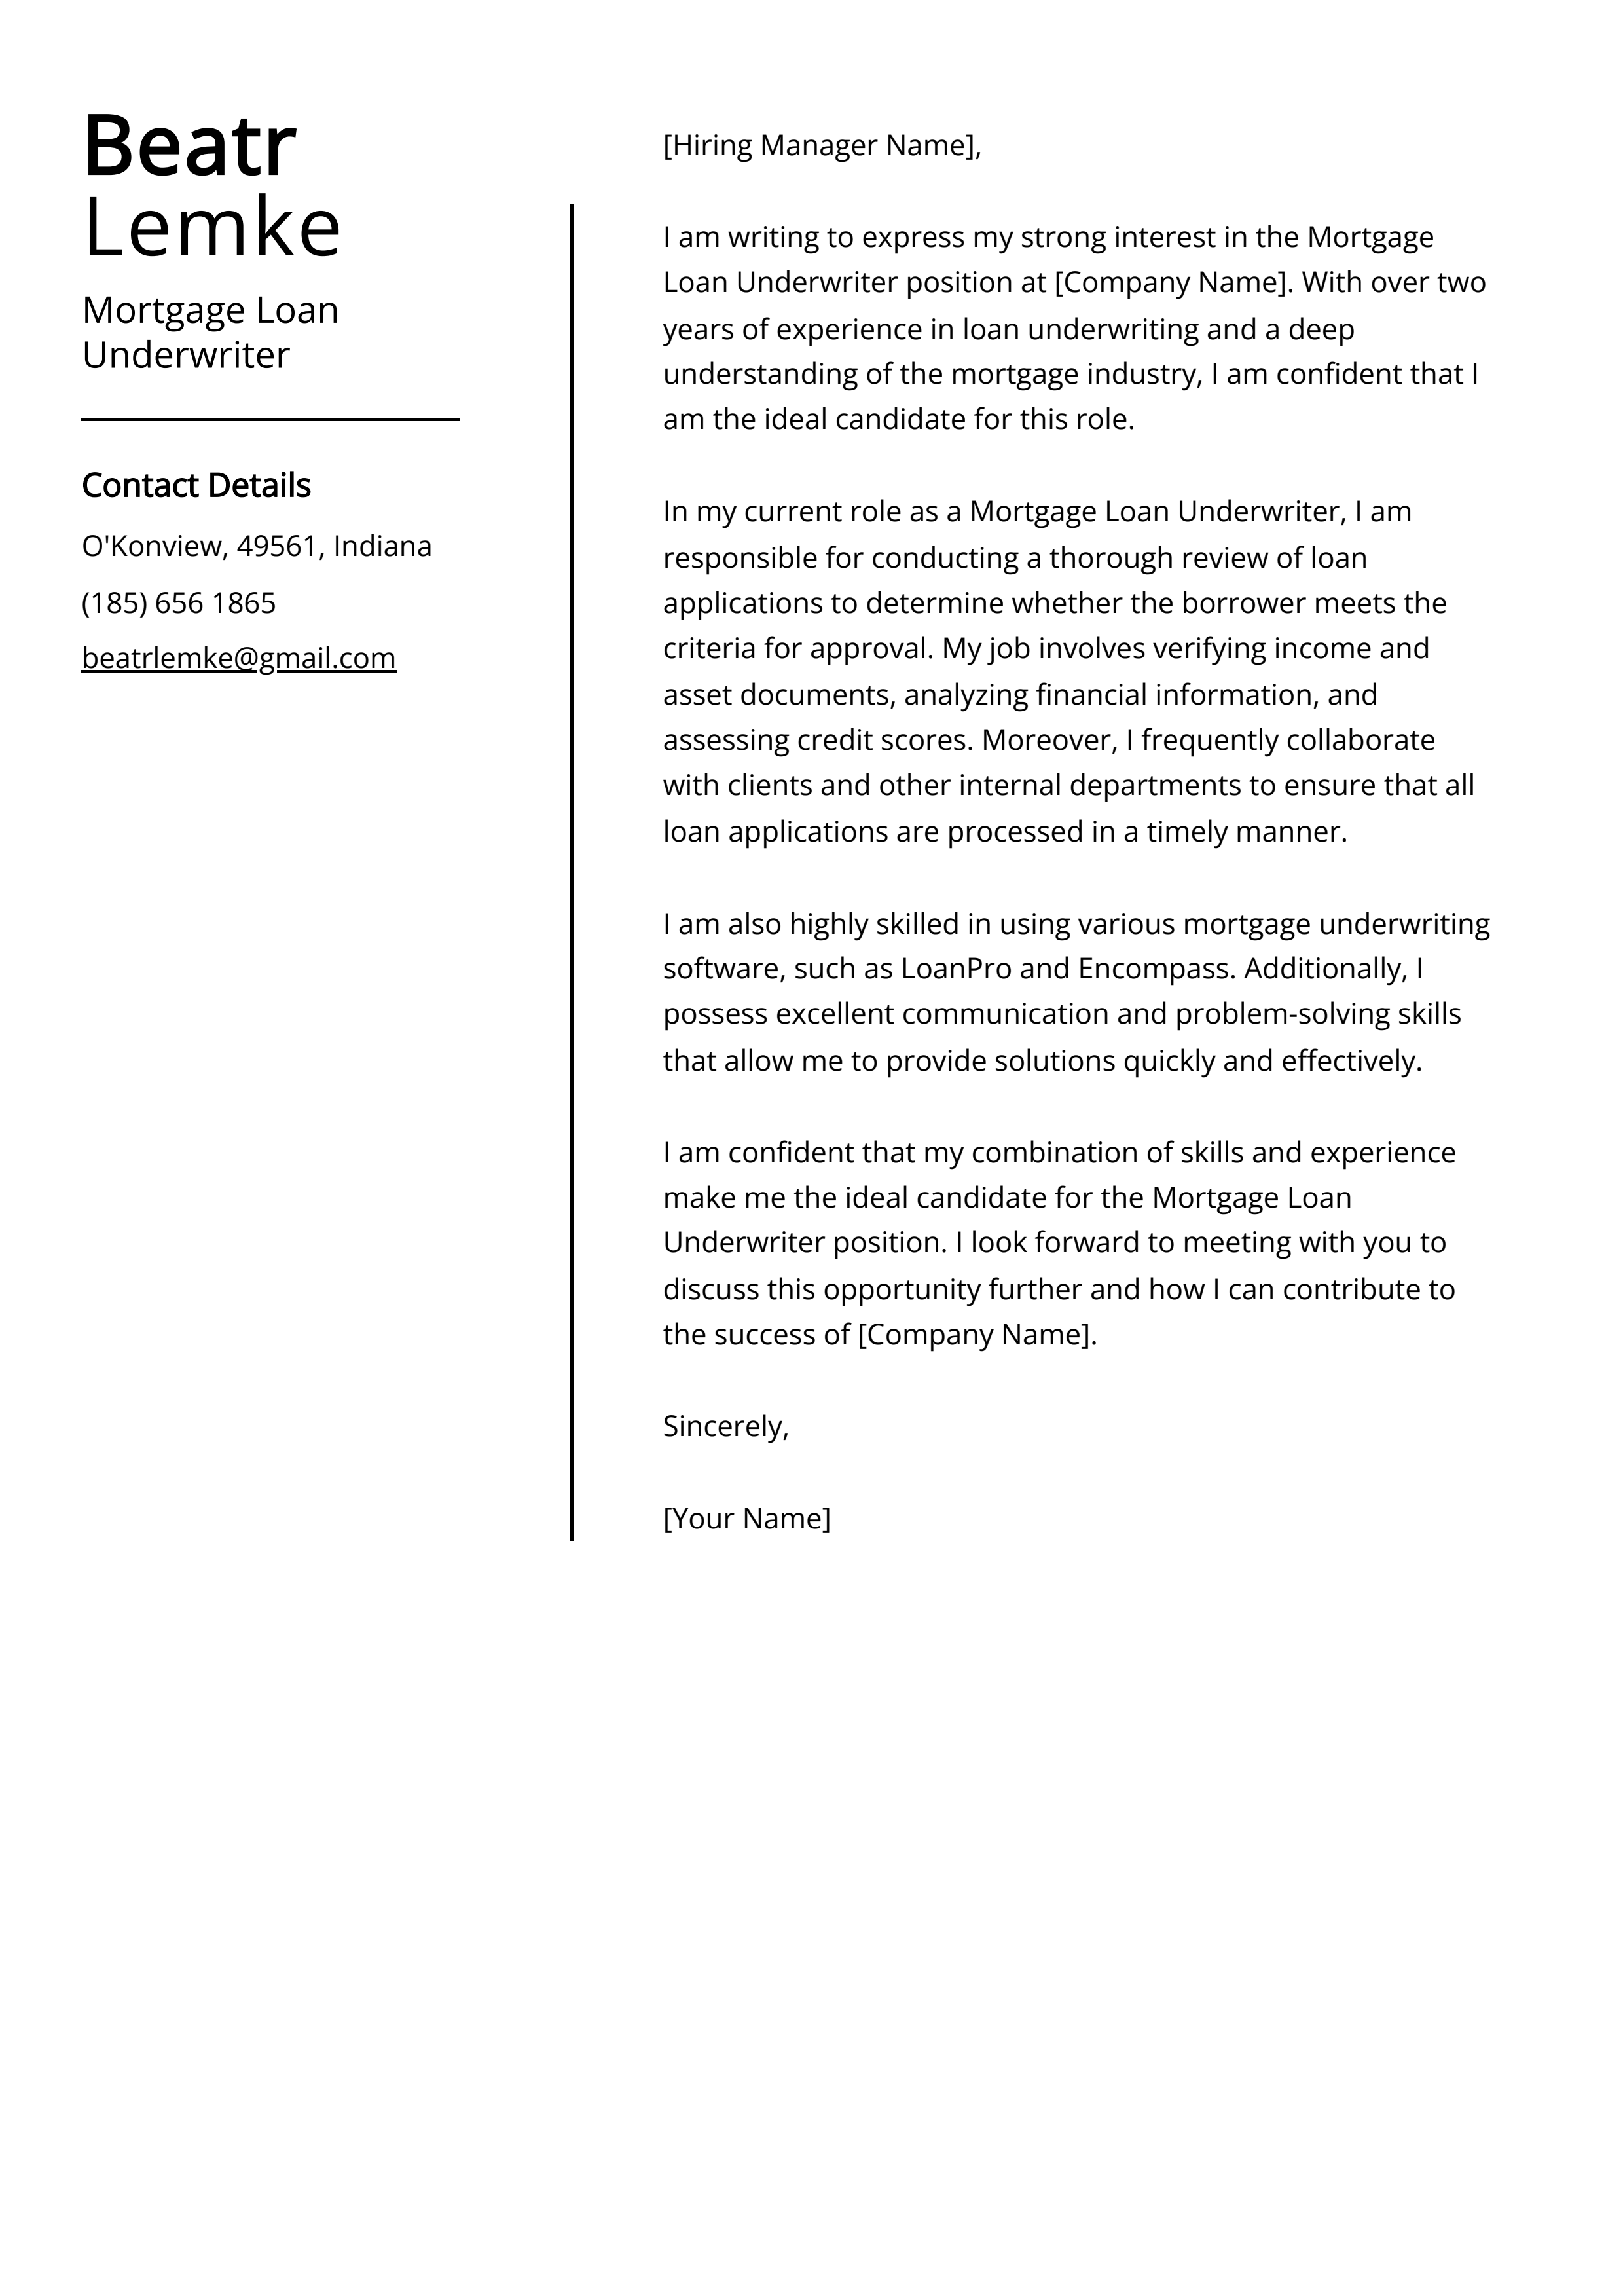 Mortgage Loan Underwriter Cover Letter Example